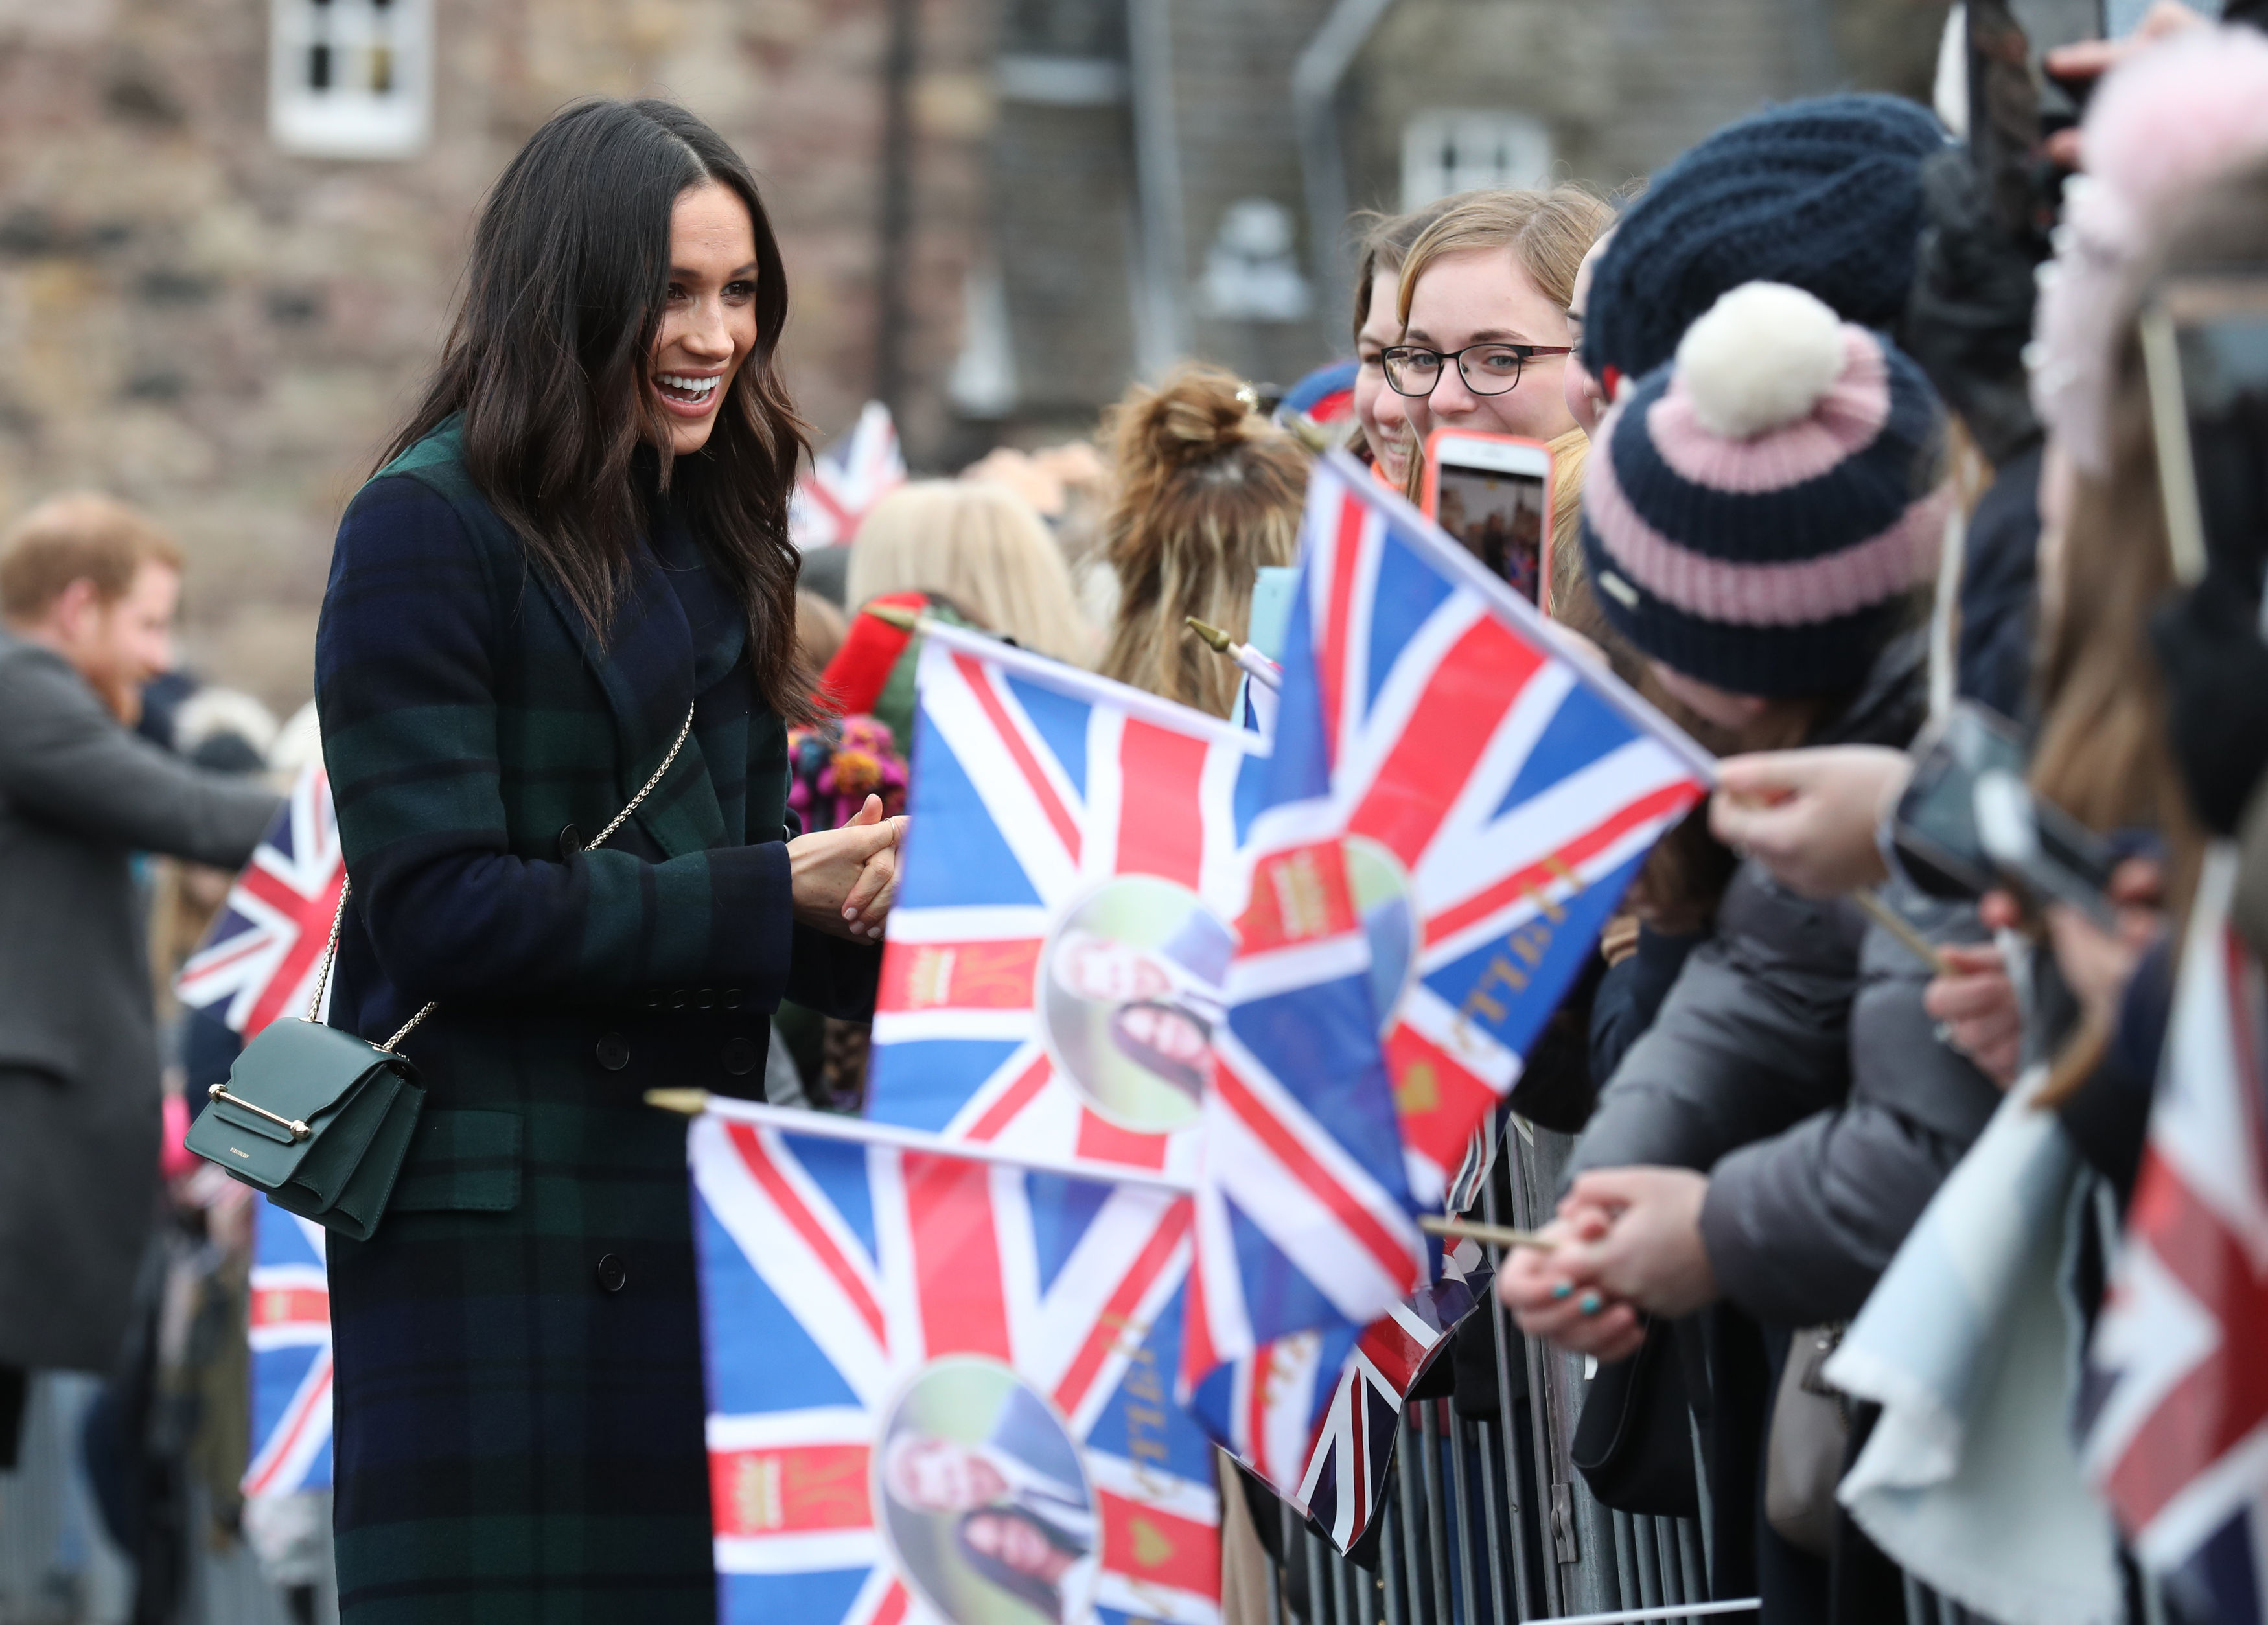 Flags were out for Meghan Markle during her walkabout (Andrew Milligan/PA)